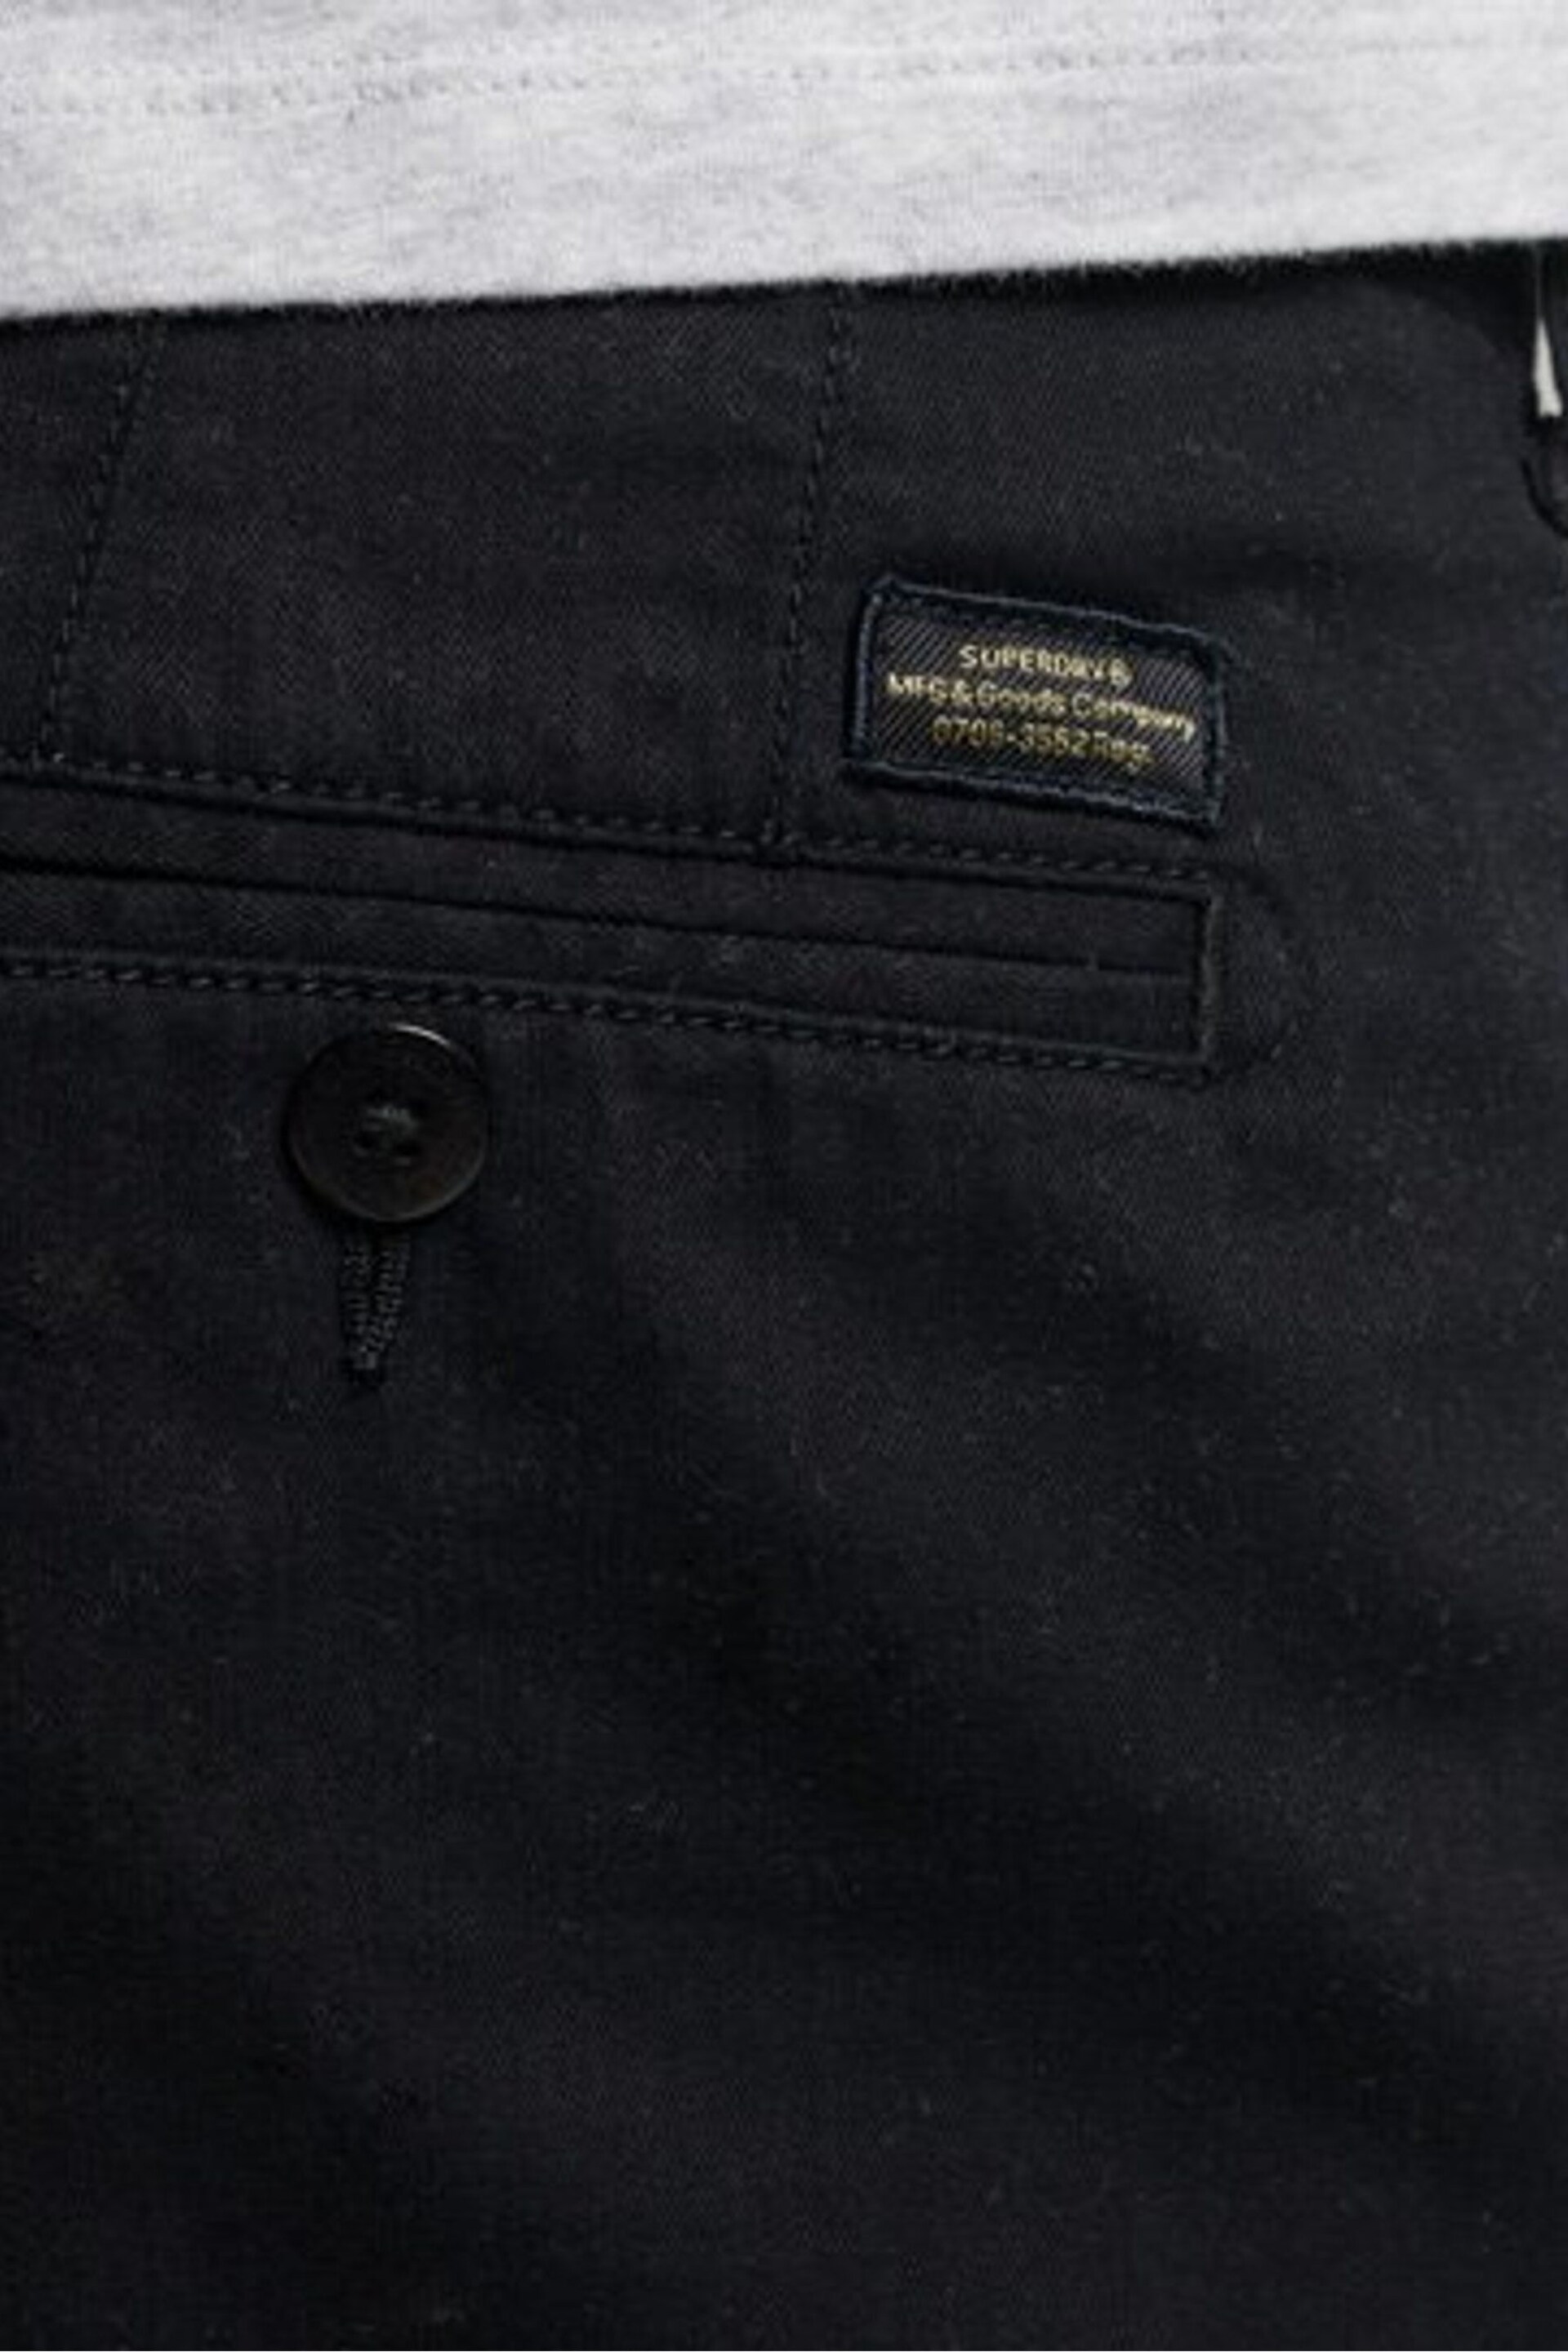 Superdry Black Officer Chino Shorts - Image 6 of 6